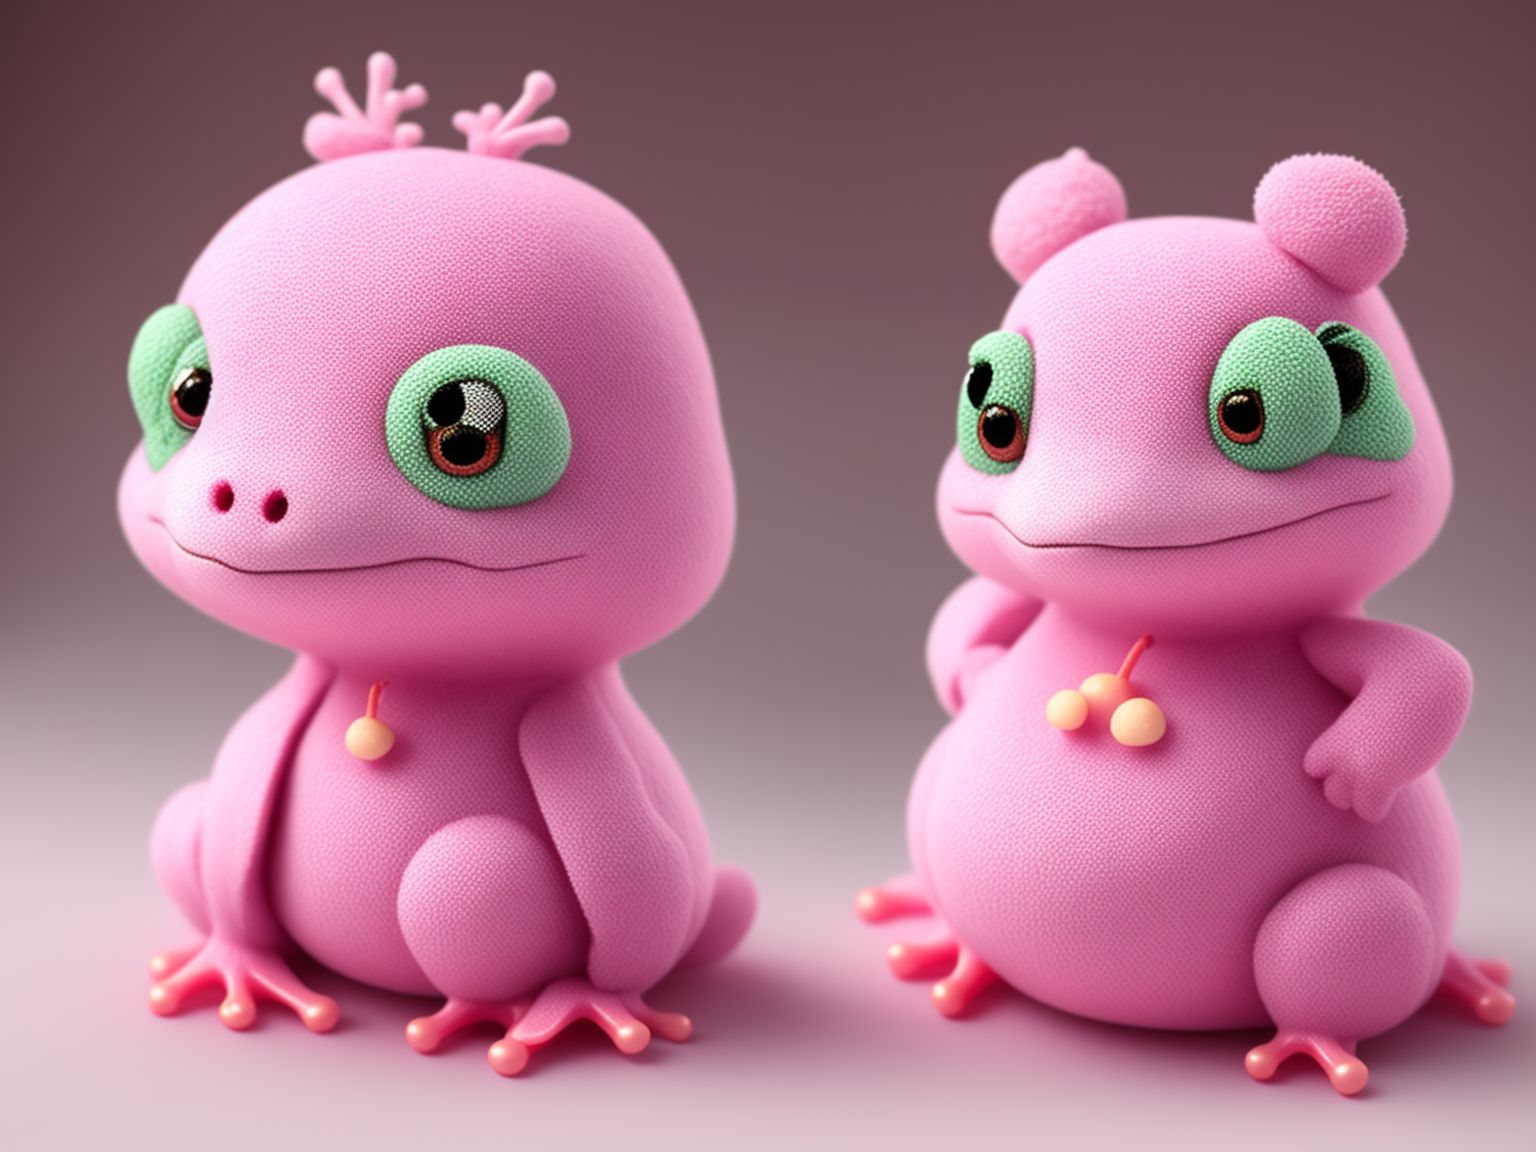 dnbcd: Visible stitch line, Very cute, cute real pink frog with a